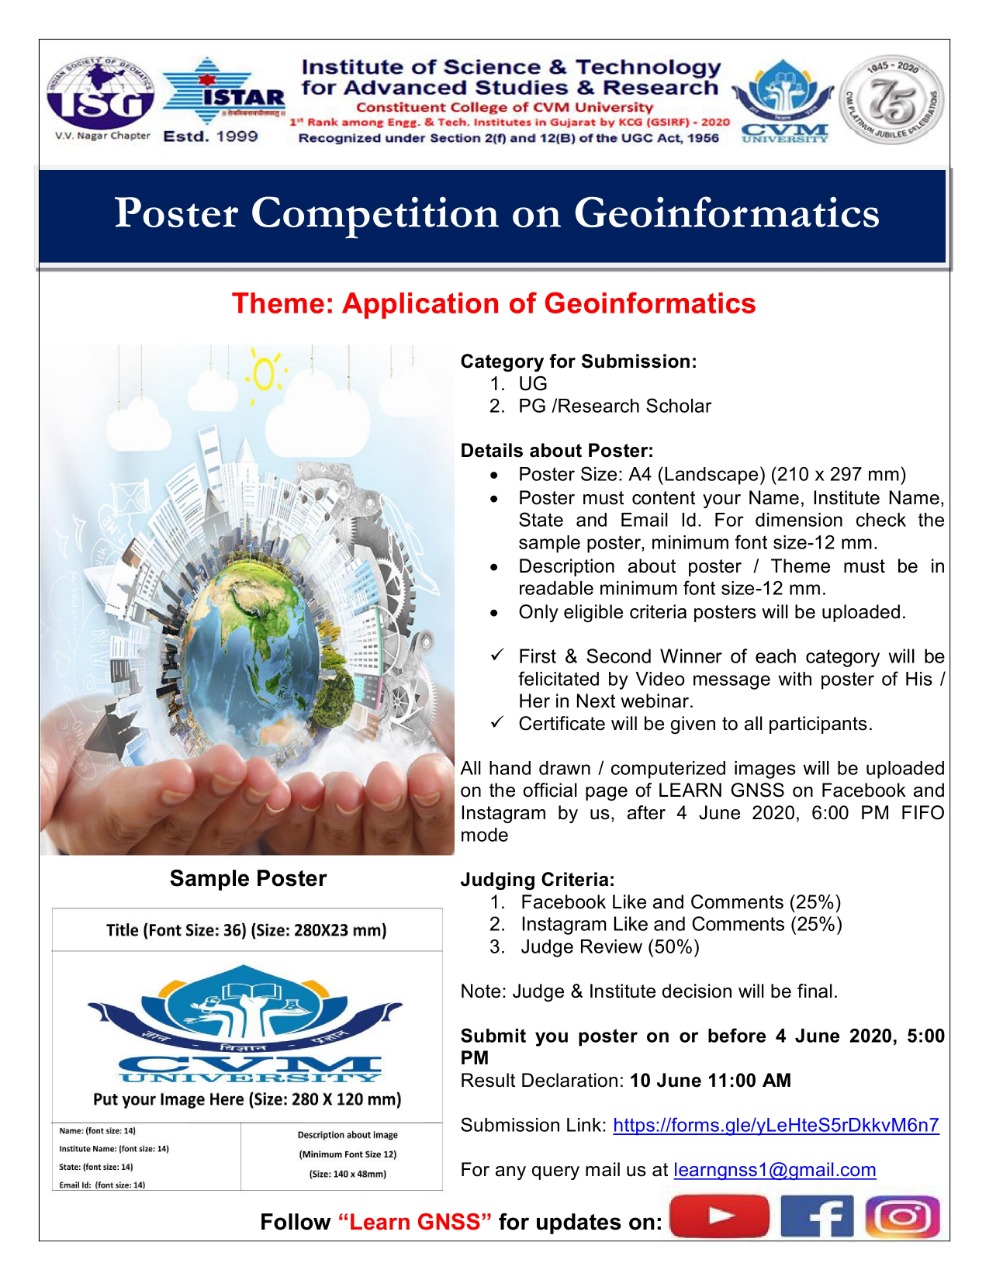 Application of Geoinformatics 